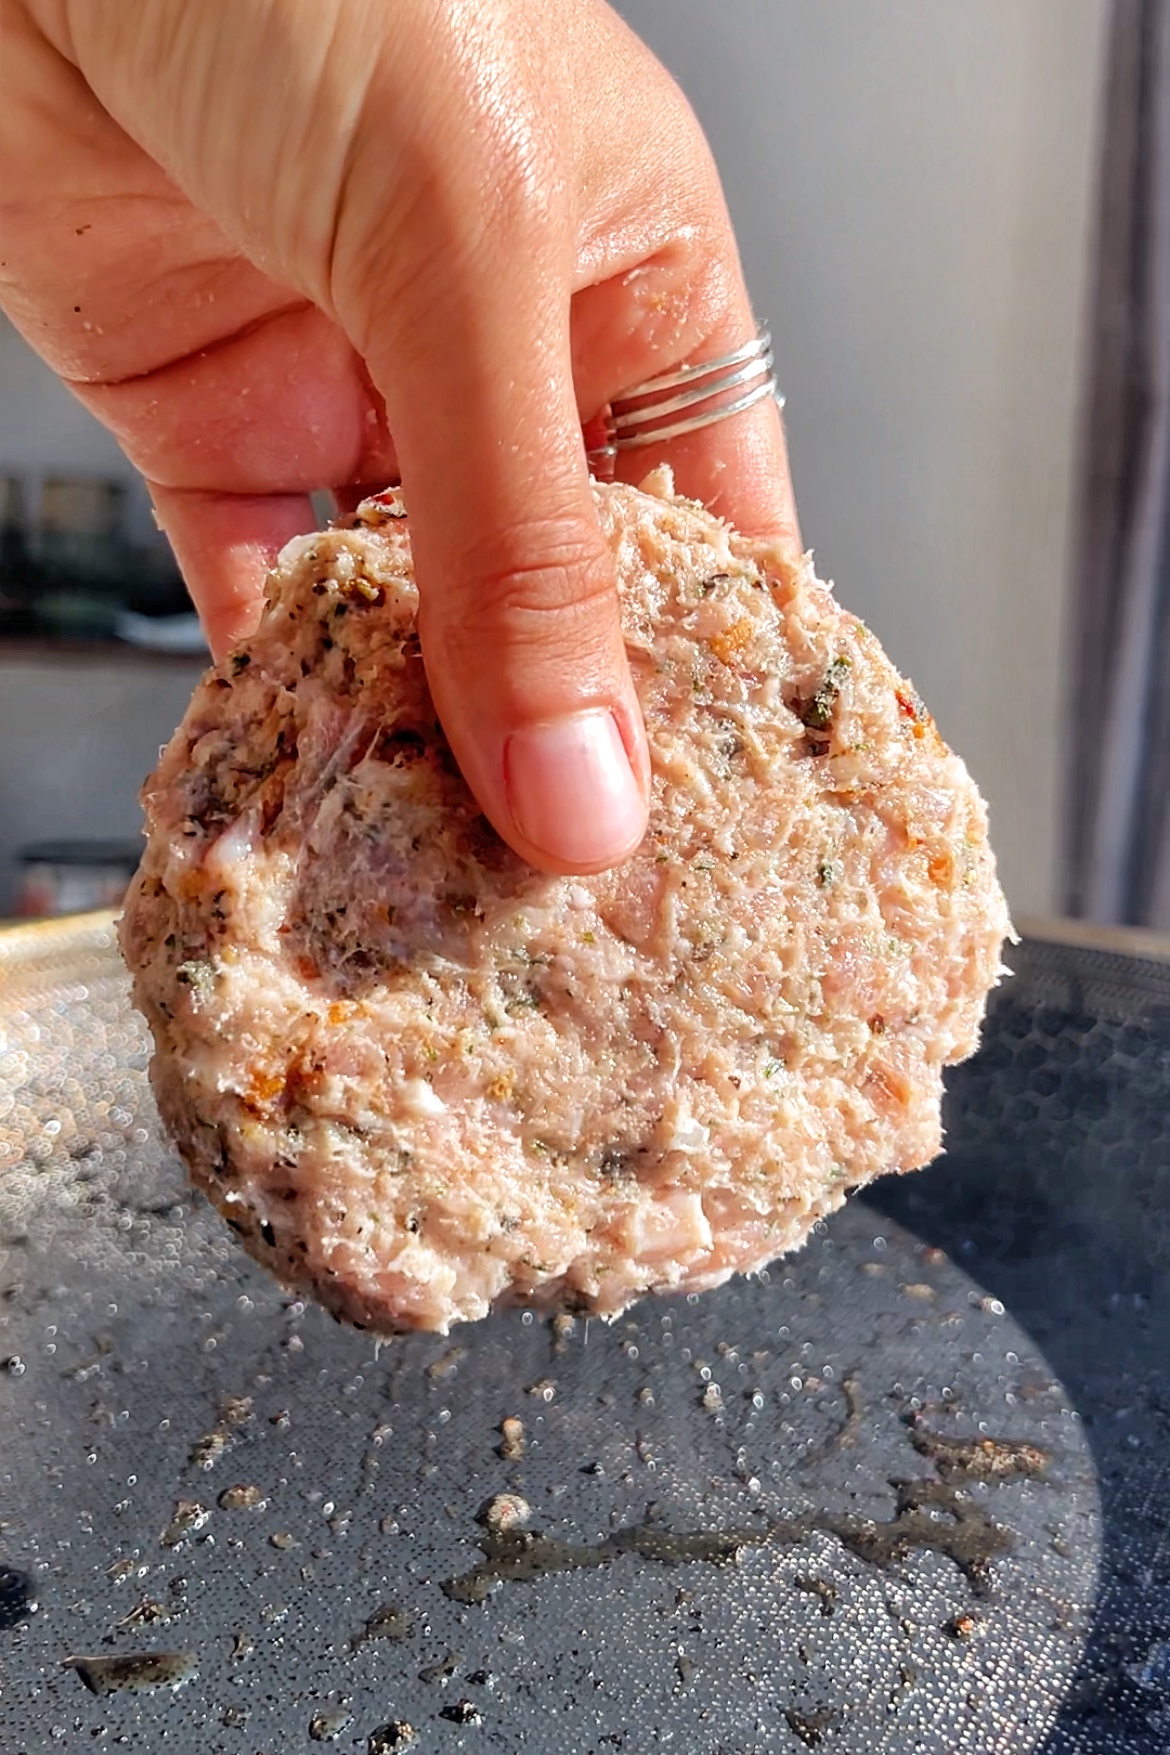 Sausage patty that is raw and being placed into a pan.